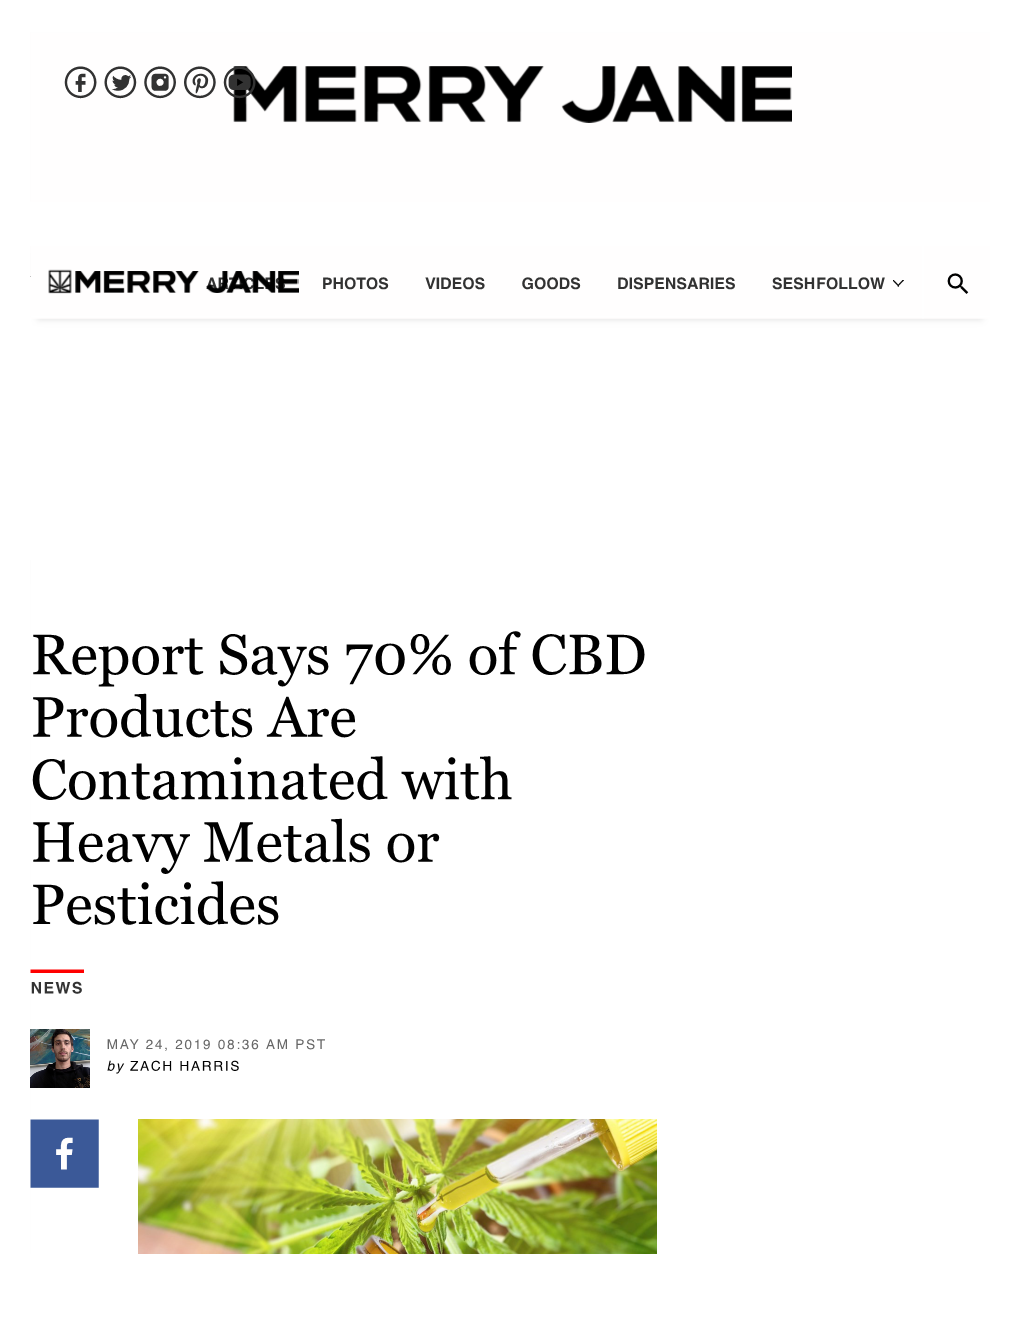 Report Says 70% of CBD Products Are Contaminated with Heavy Metals Or Pesticides